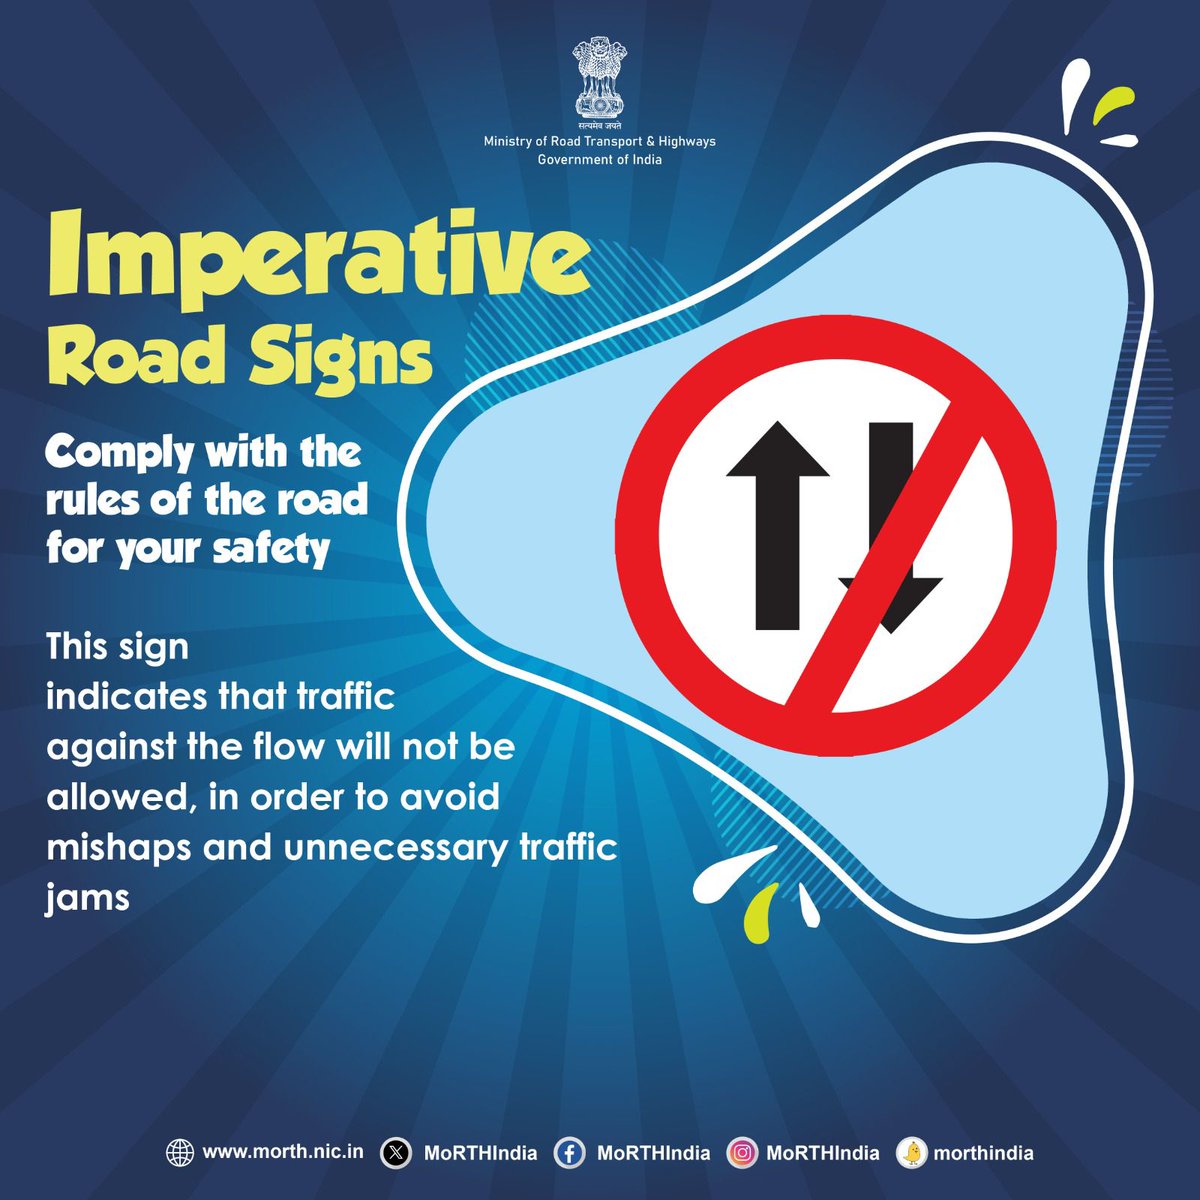 Mandatory road signs are essential for ensuring road safety. They guide drivers with instructions and actions that must be followed, such as stopping at a stop sign, yielding to others, or observing speed limits. #MandatoryRoadSigns #RoadSafety #DriveResponsibly